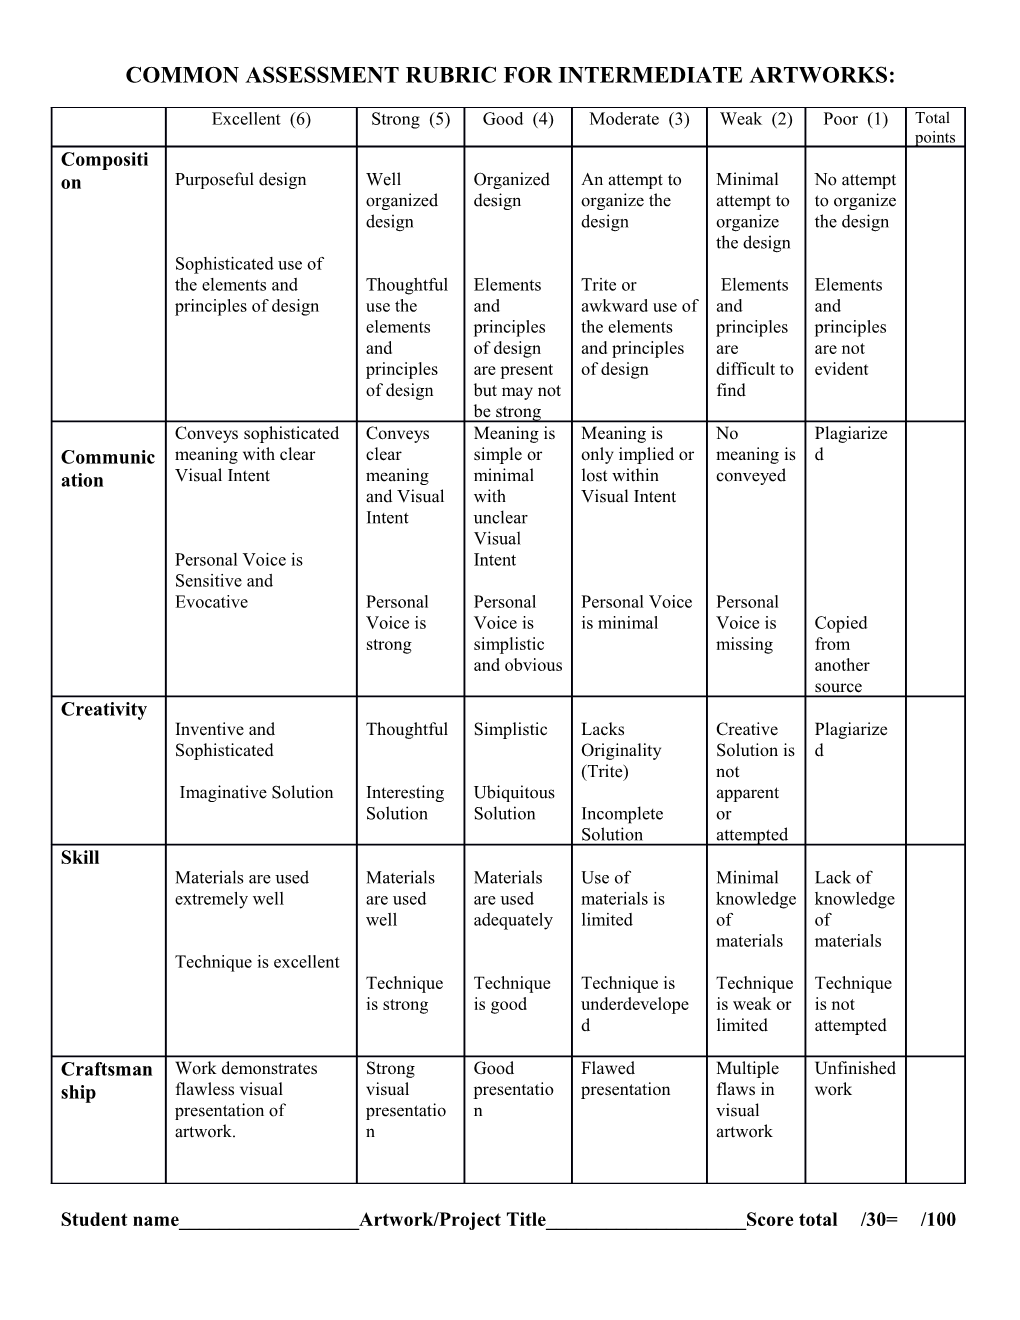 Common Assessment Rubric for Ap Individual Works